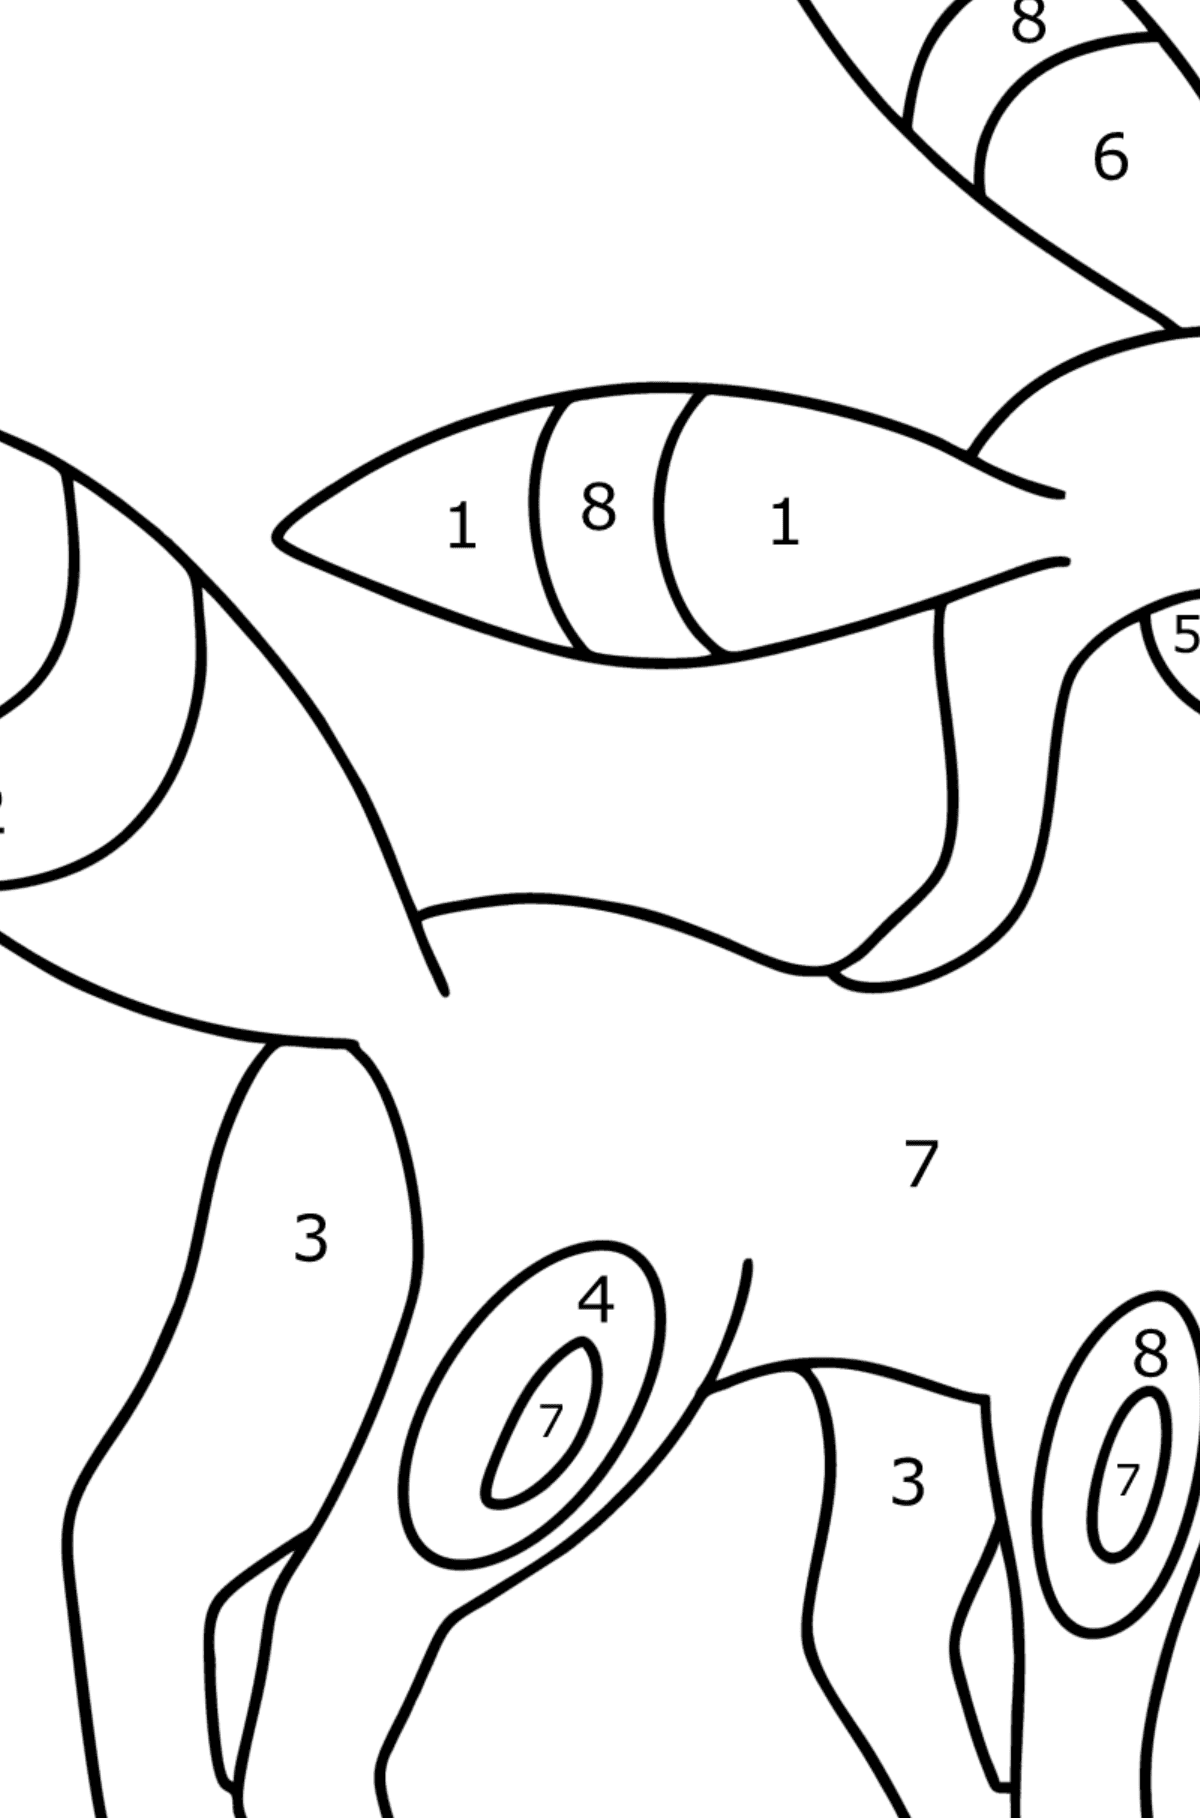 Coloring page Pokemon Go Umbreon - Coloring by Numbers for Kids